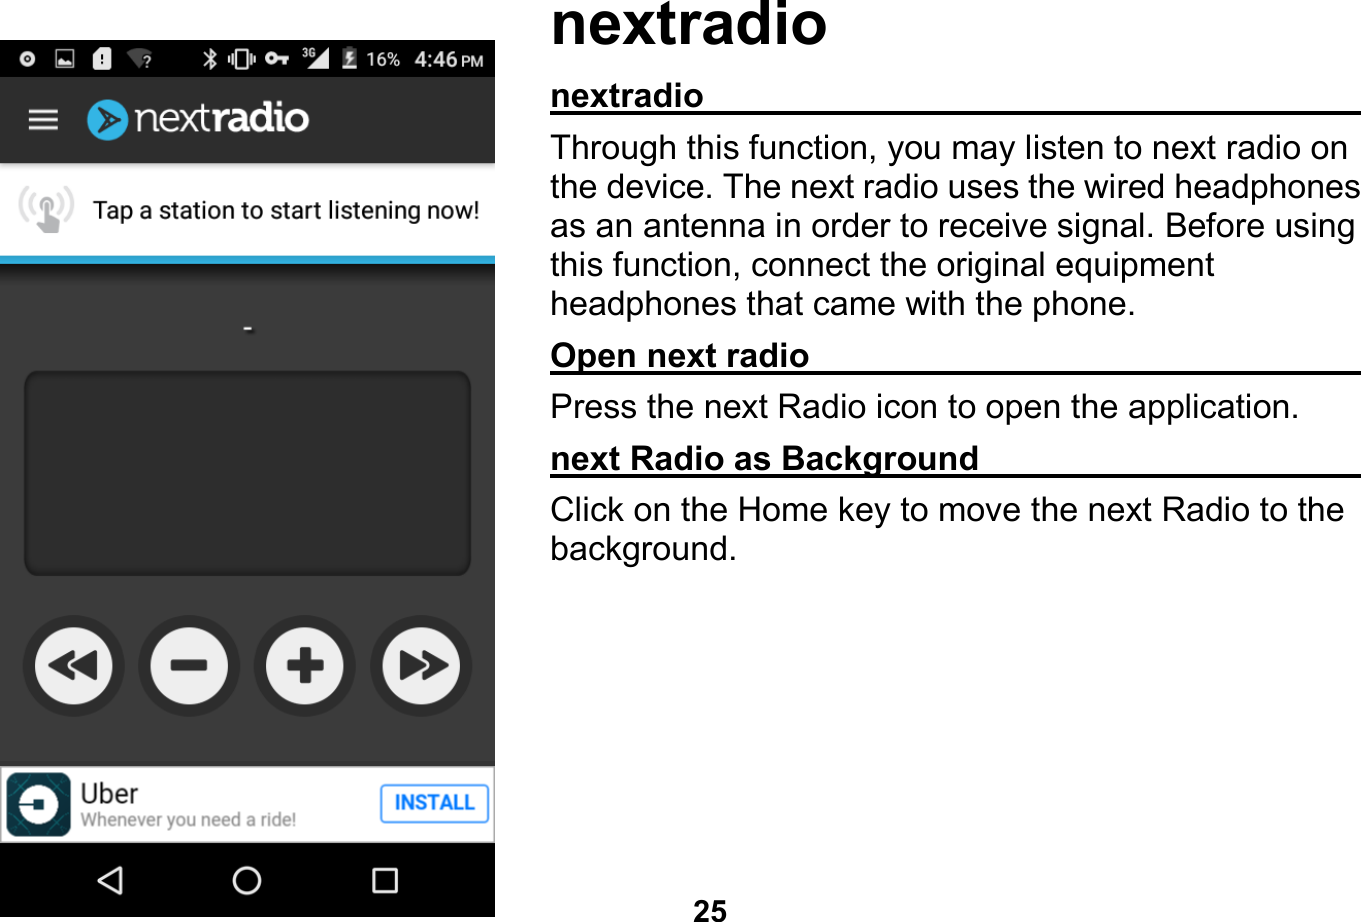   25  nextradio nextradio                                                    Through this function, you may listen to next radio on the device. The next radio uses the wired headphones as an antenna in order to receive signal. Before using this function, connect the original equipment headphones that came with the phone. Open next radio                                              Press the next Radio icon to open the application. next Radio as Background                               Click on the Home key to move the next Radio to the background.   